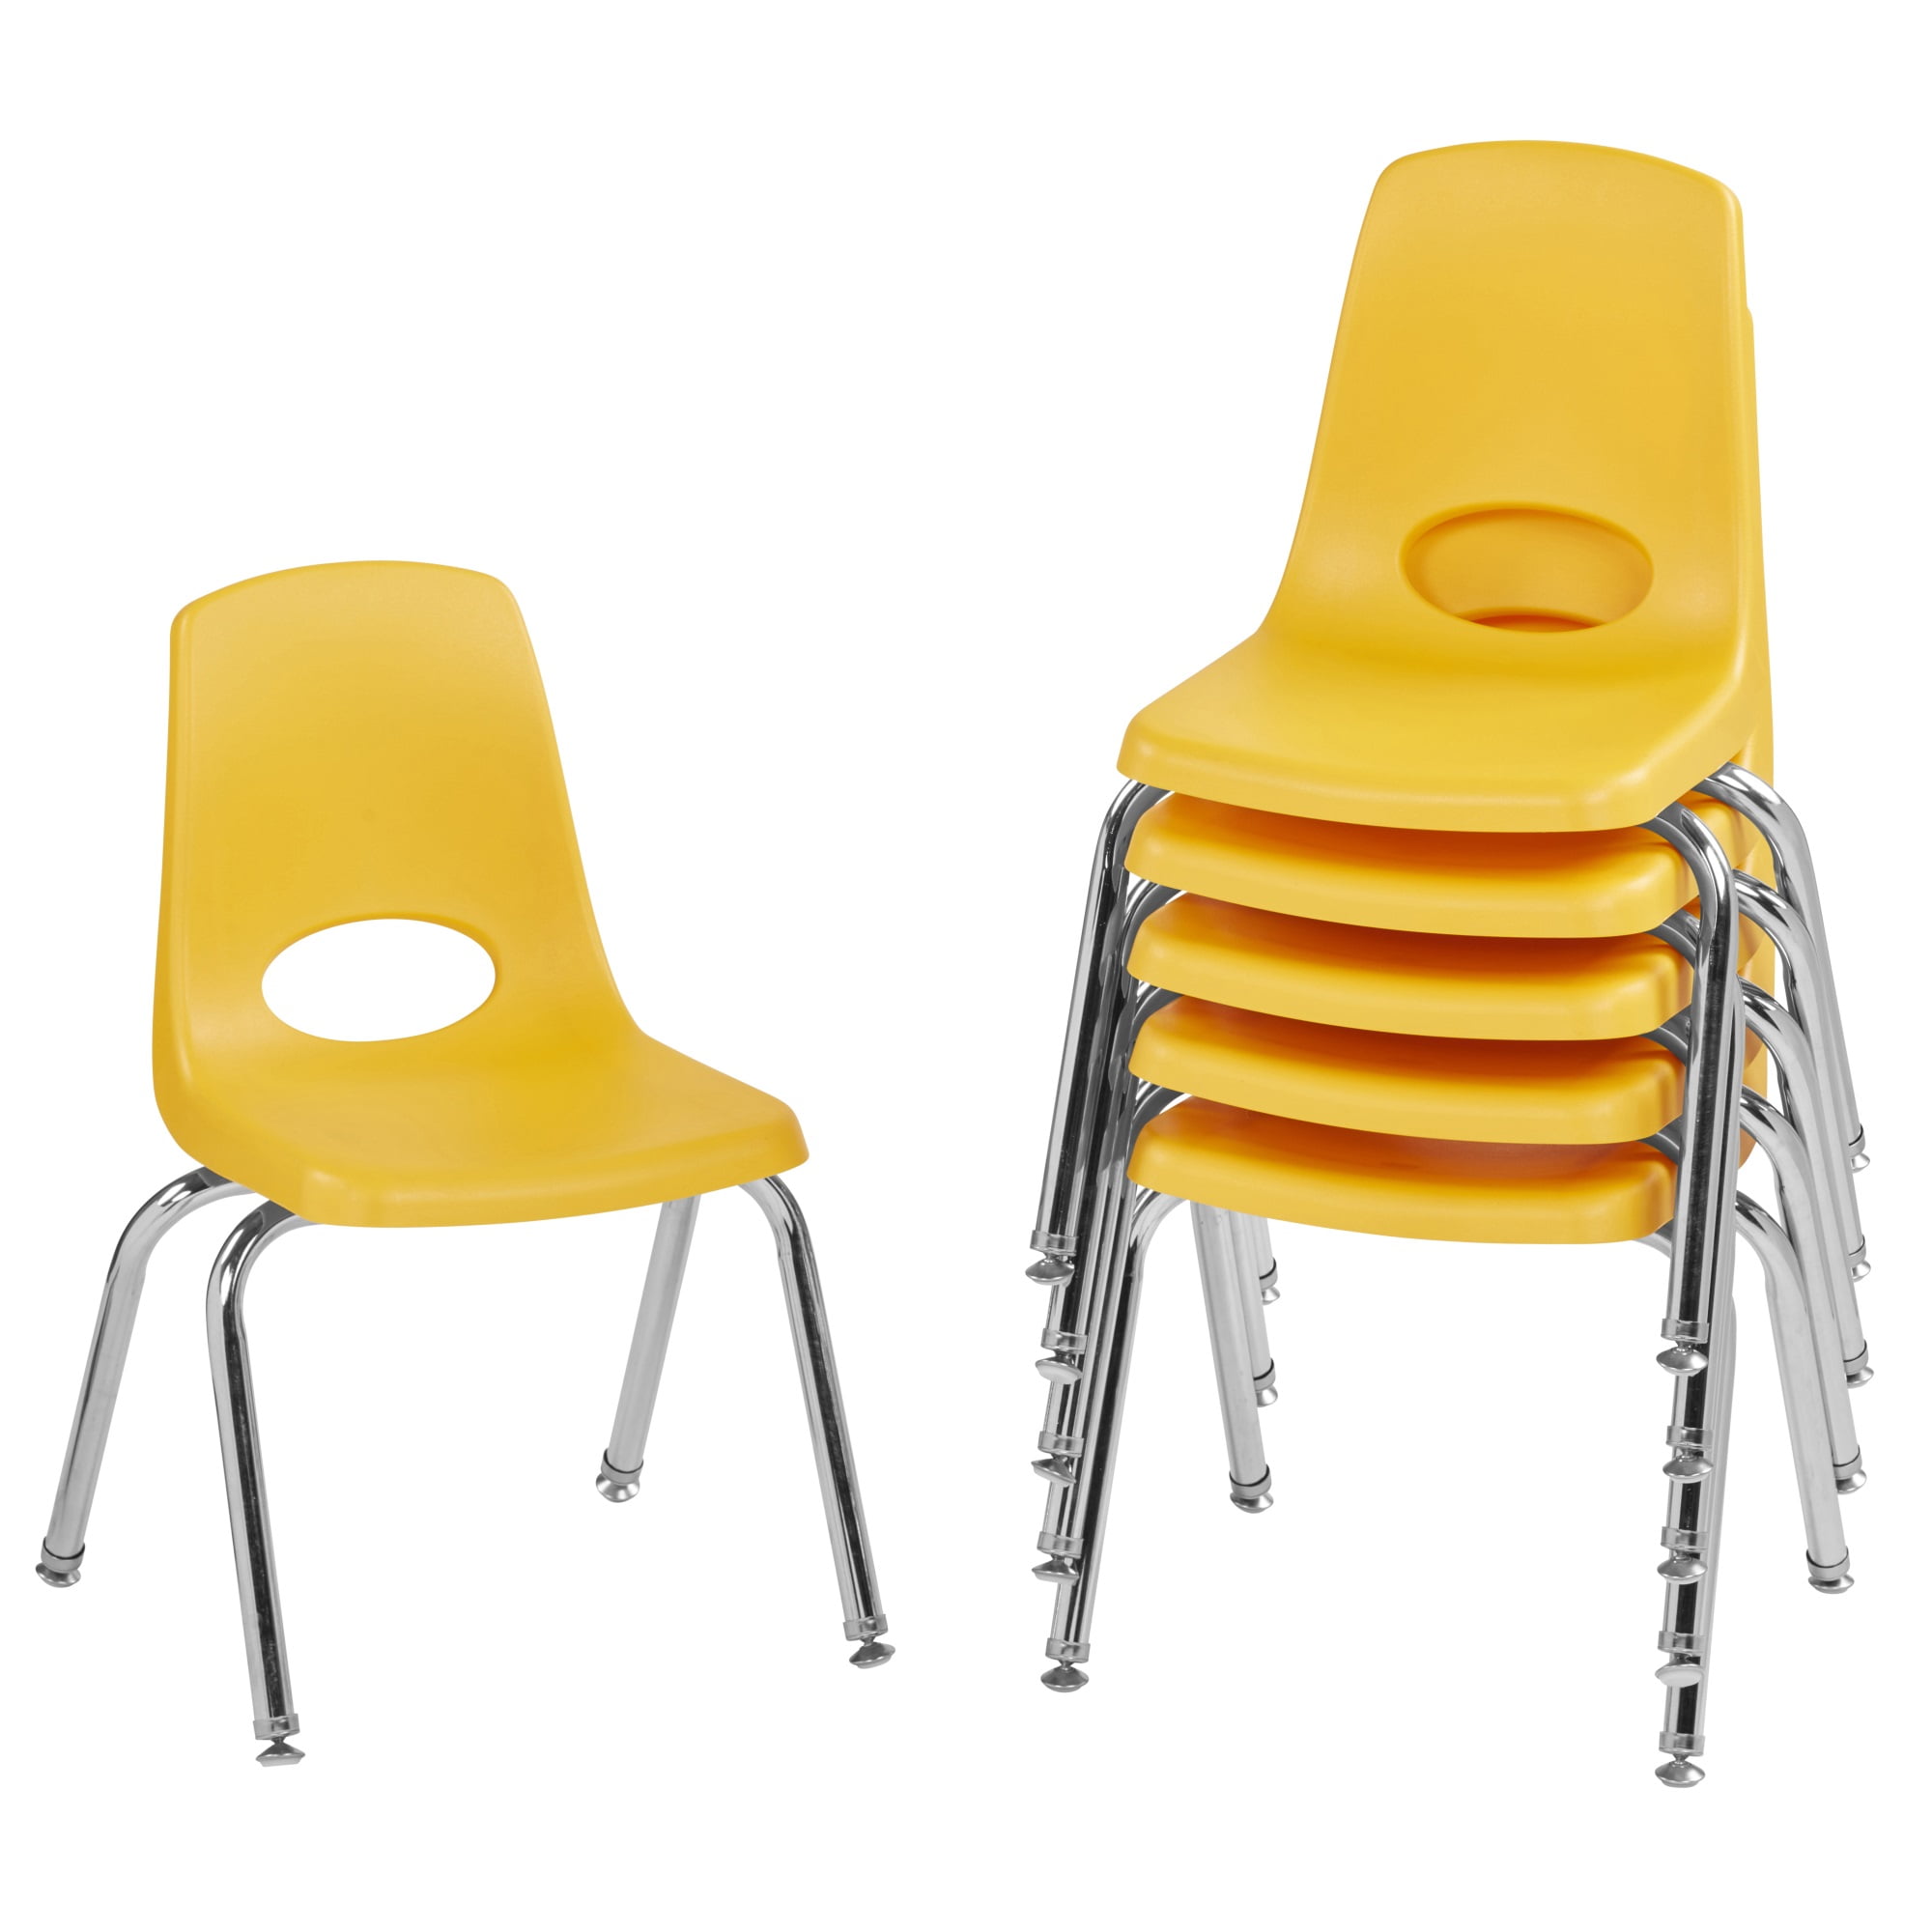 6-Pack Navy 14 School Stack Chair, Stacking Student Chairs with Chromed Steel Legs and Nylon Swivel Glides 